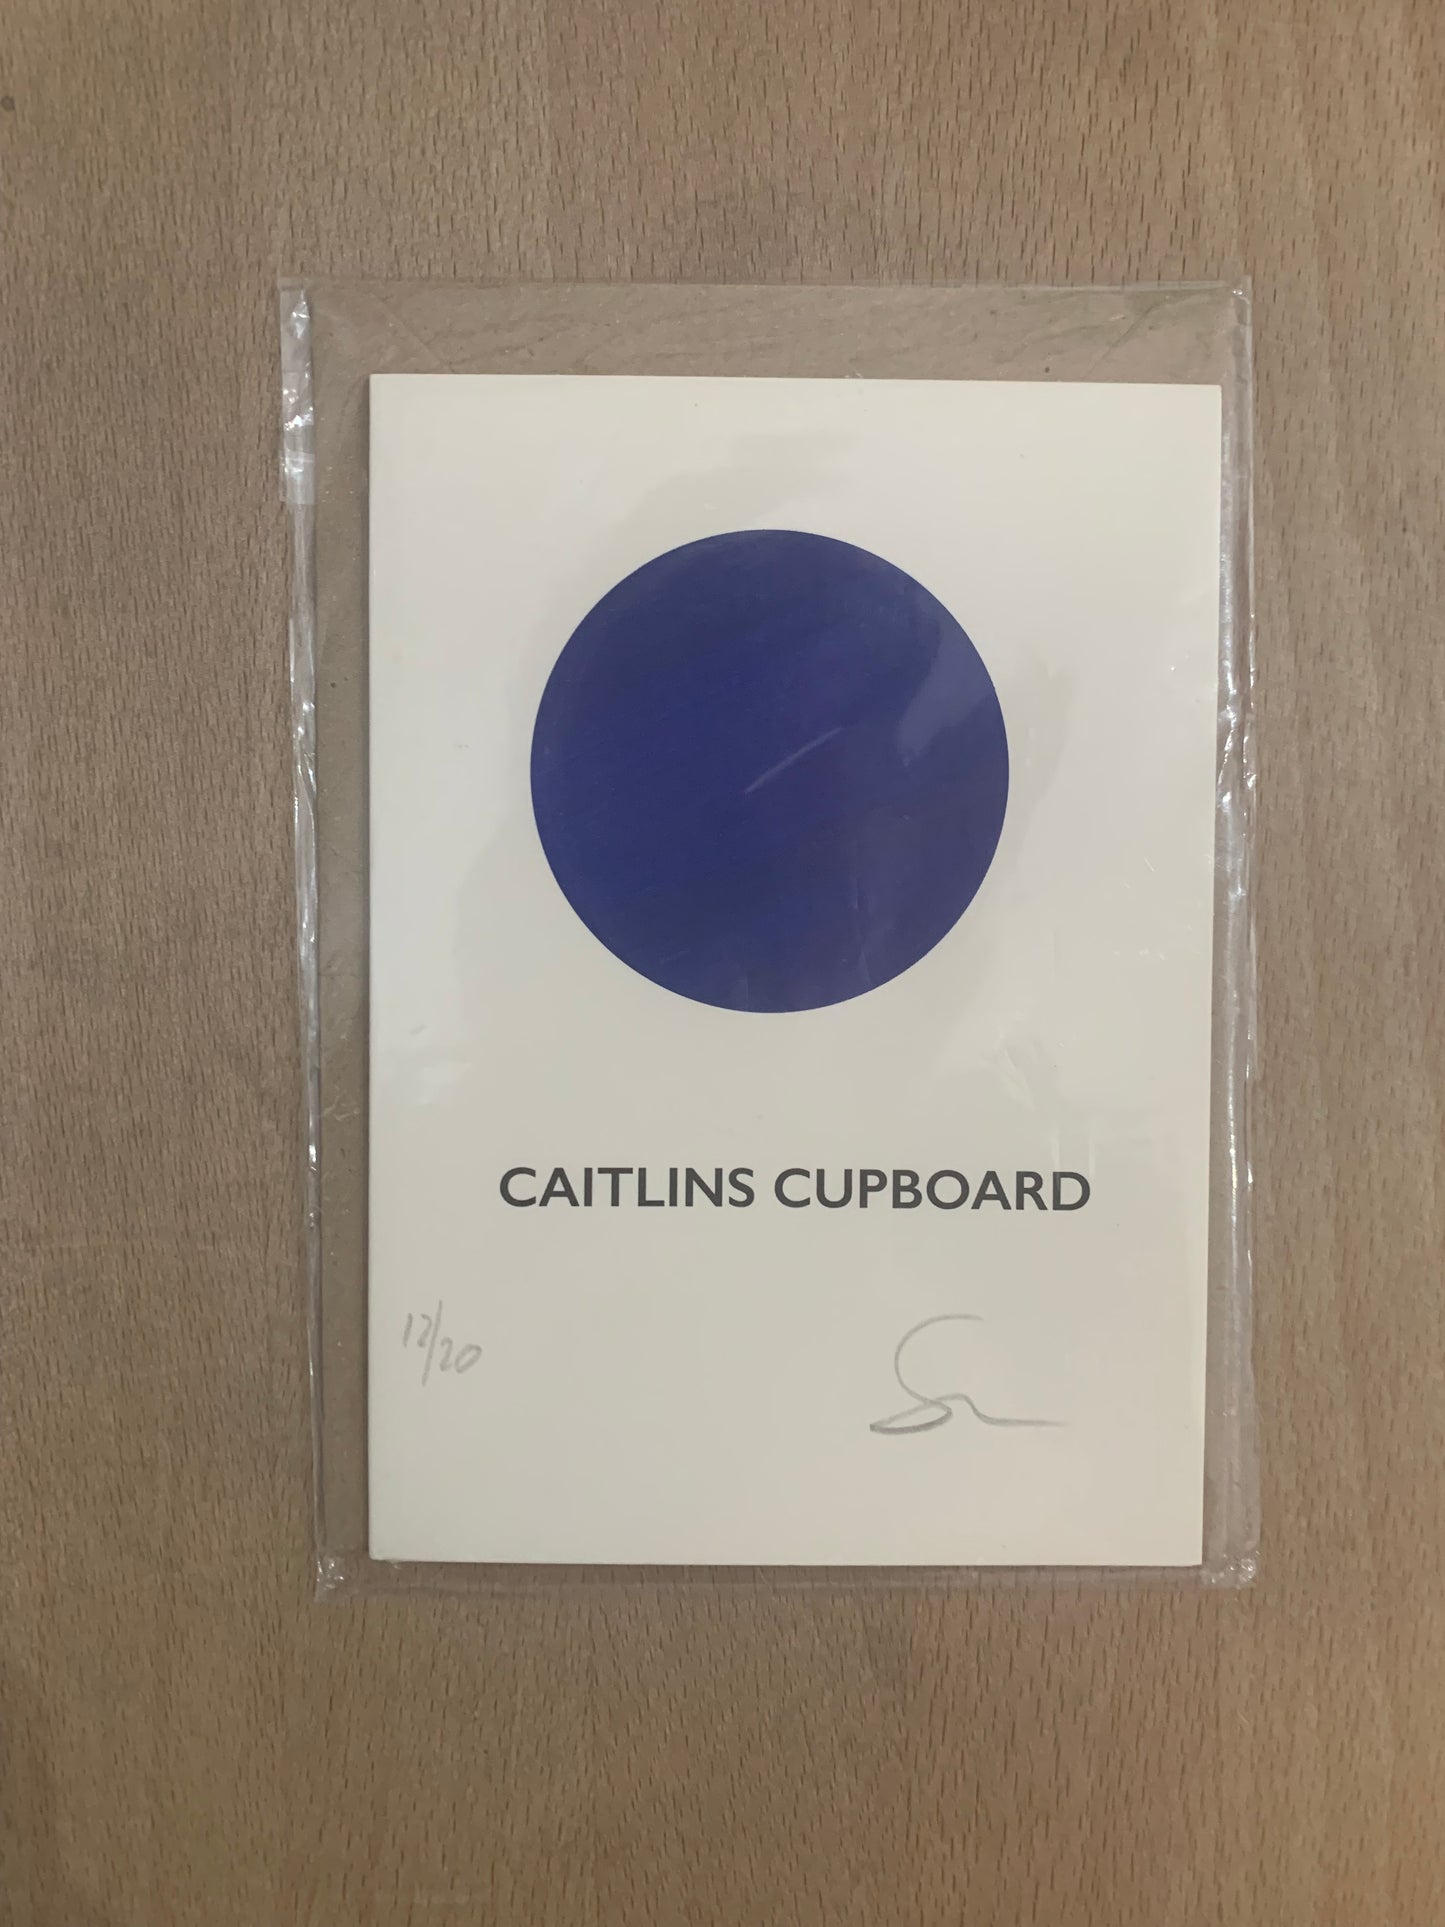 CMPH "Caitlins cupboard" parting shot card